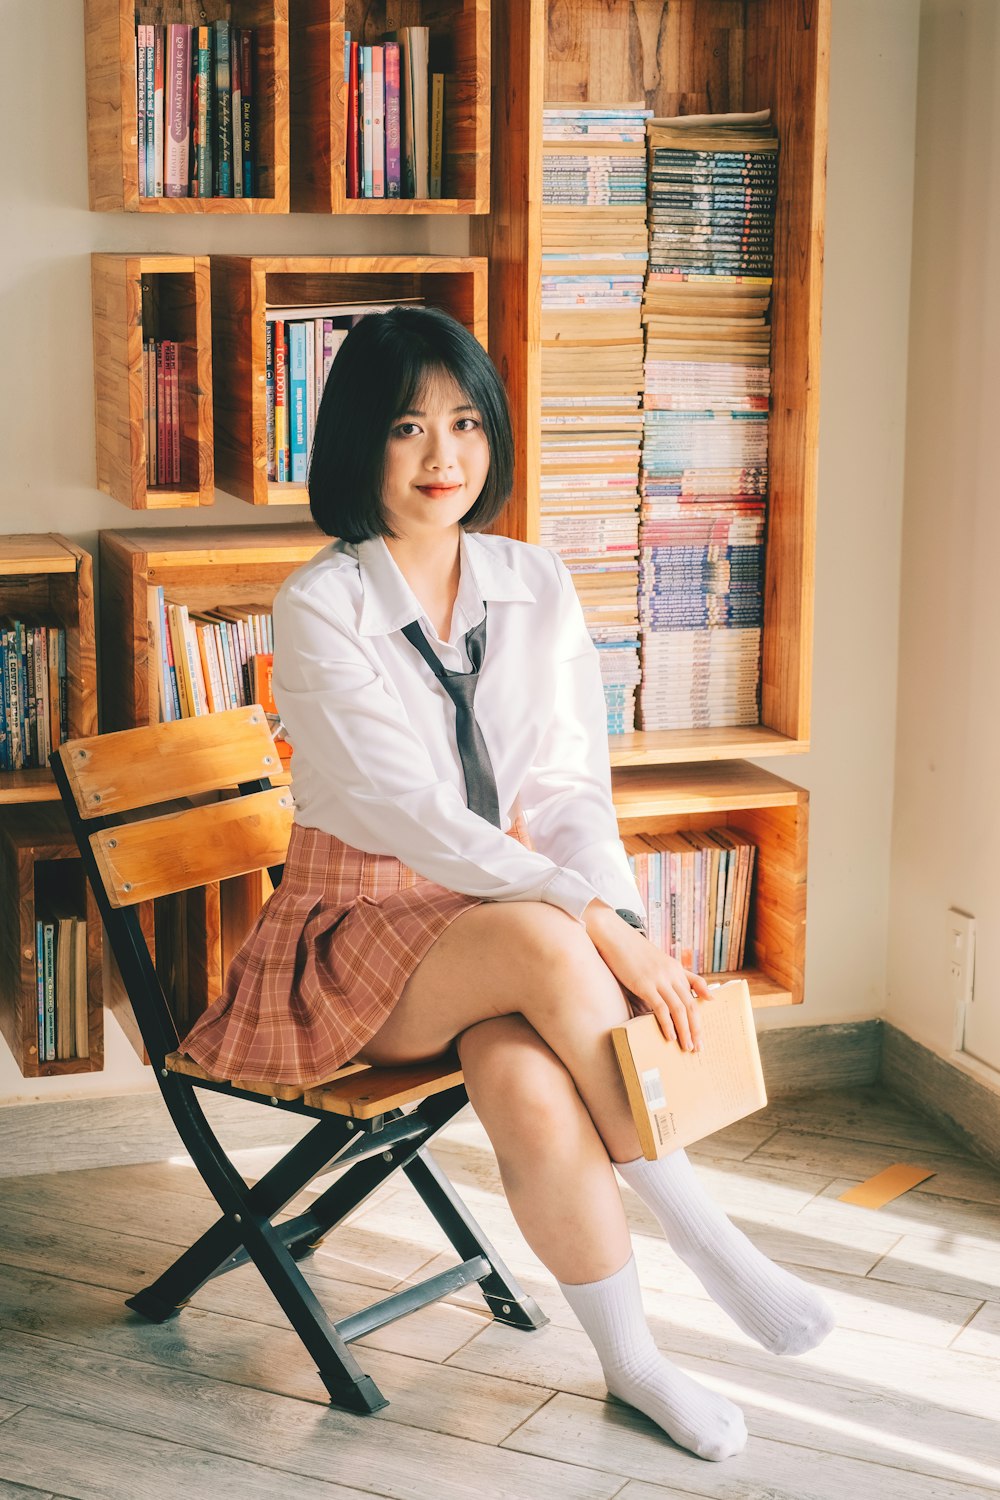 a woman sitting on a chair in front of a bookshelf